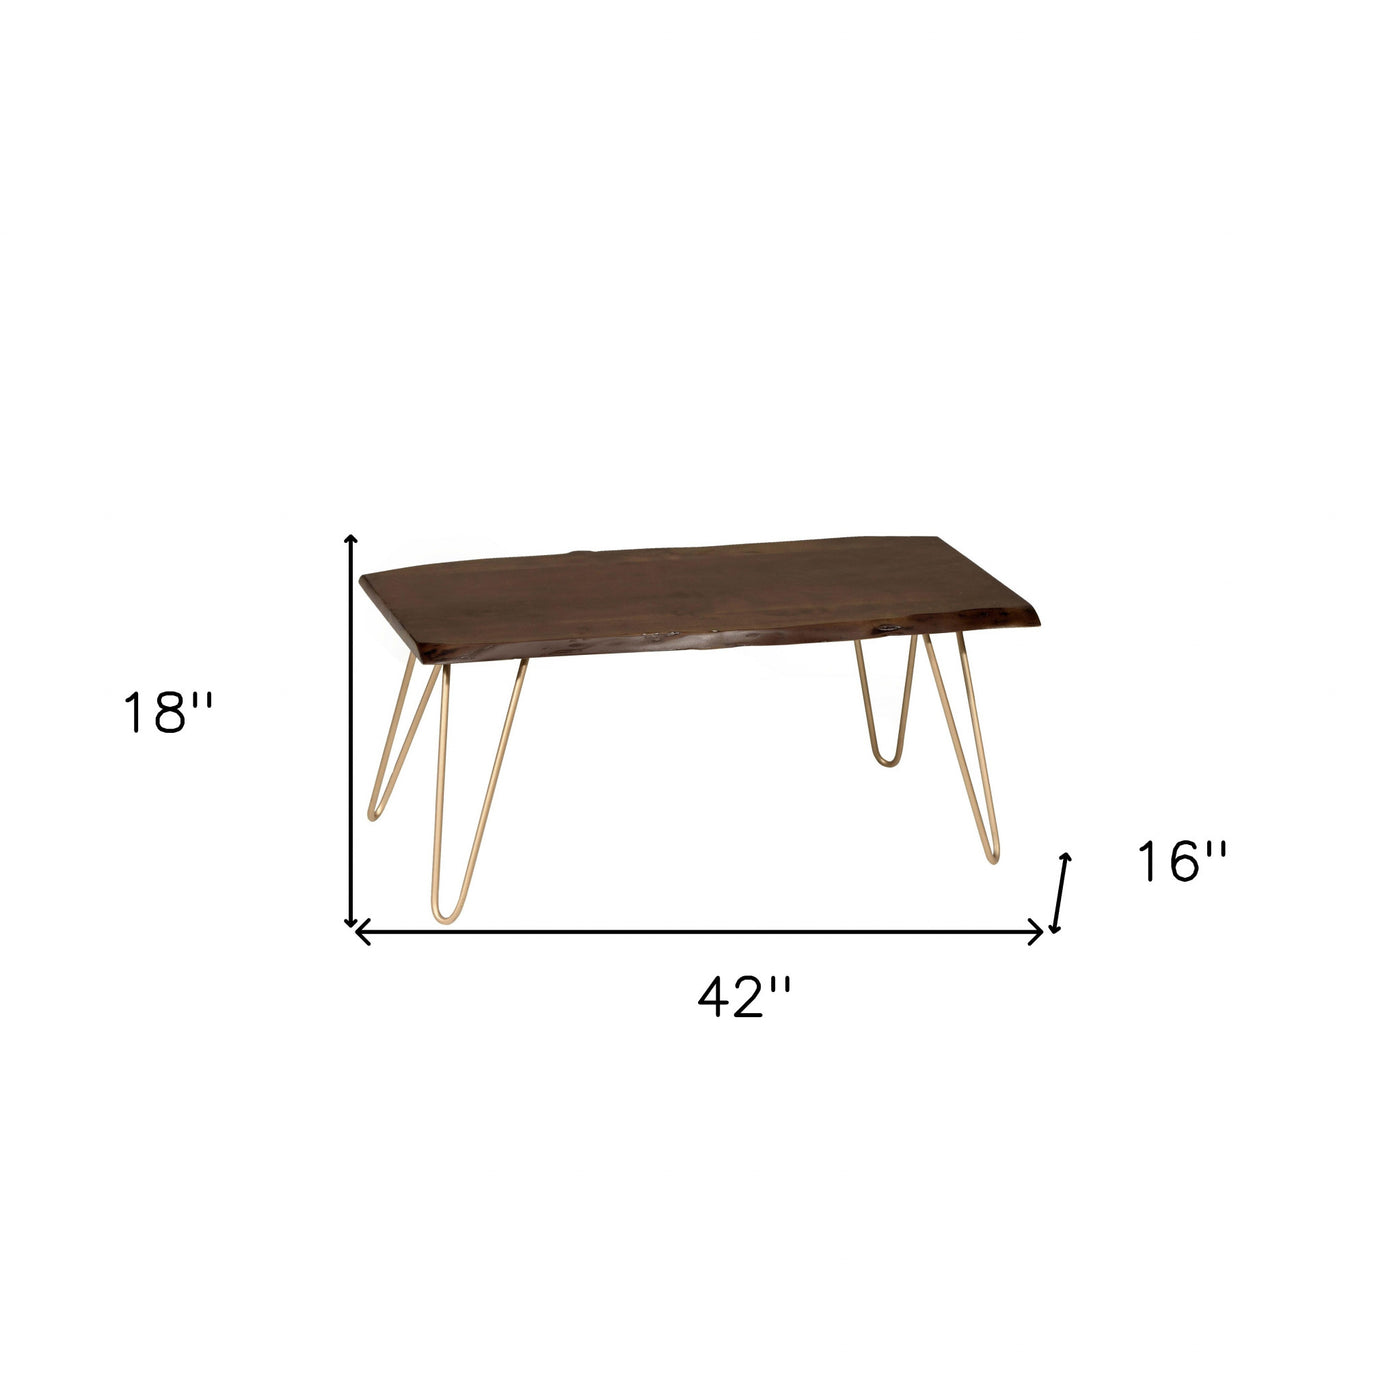 42" Gold And Rustic Brown Solid Wood Live Edge Rectangular Coffee Table